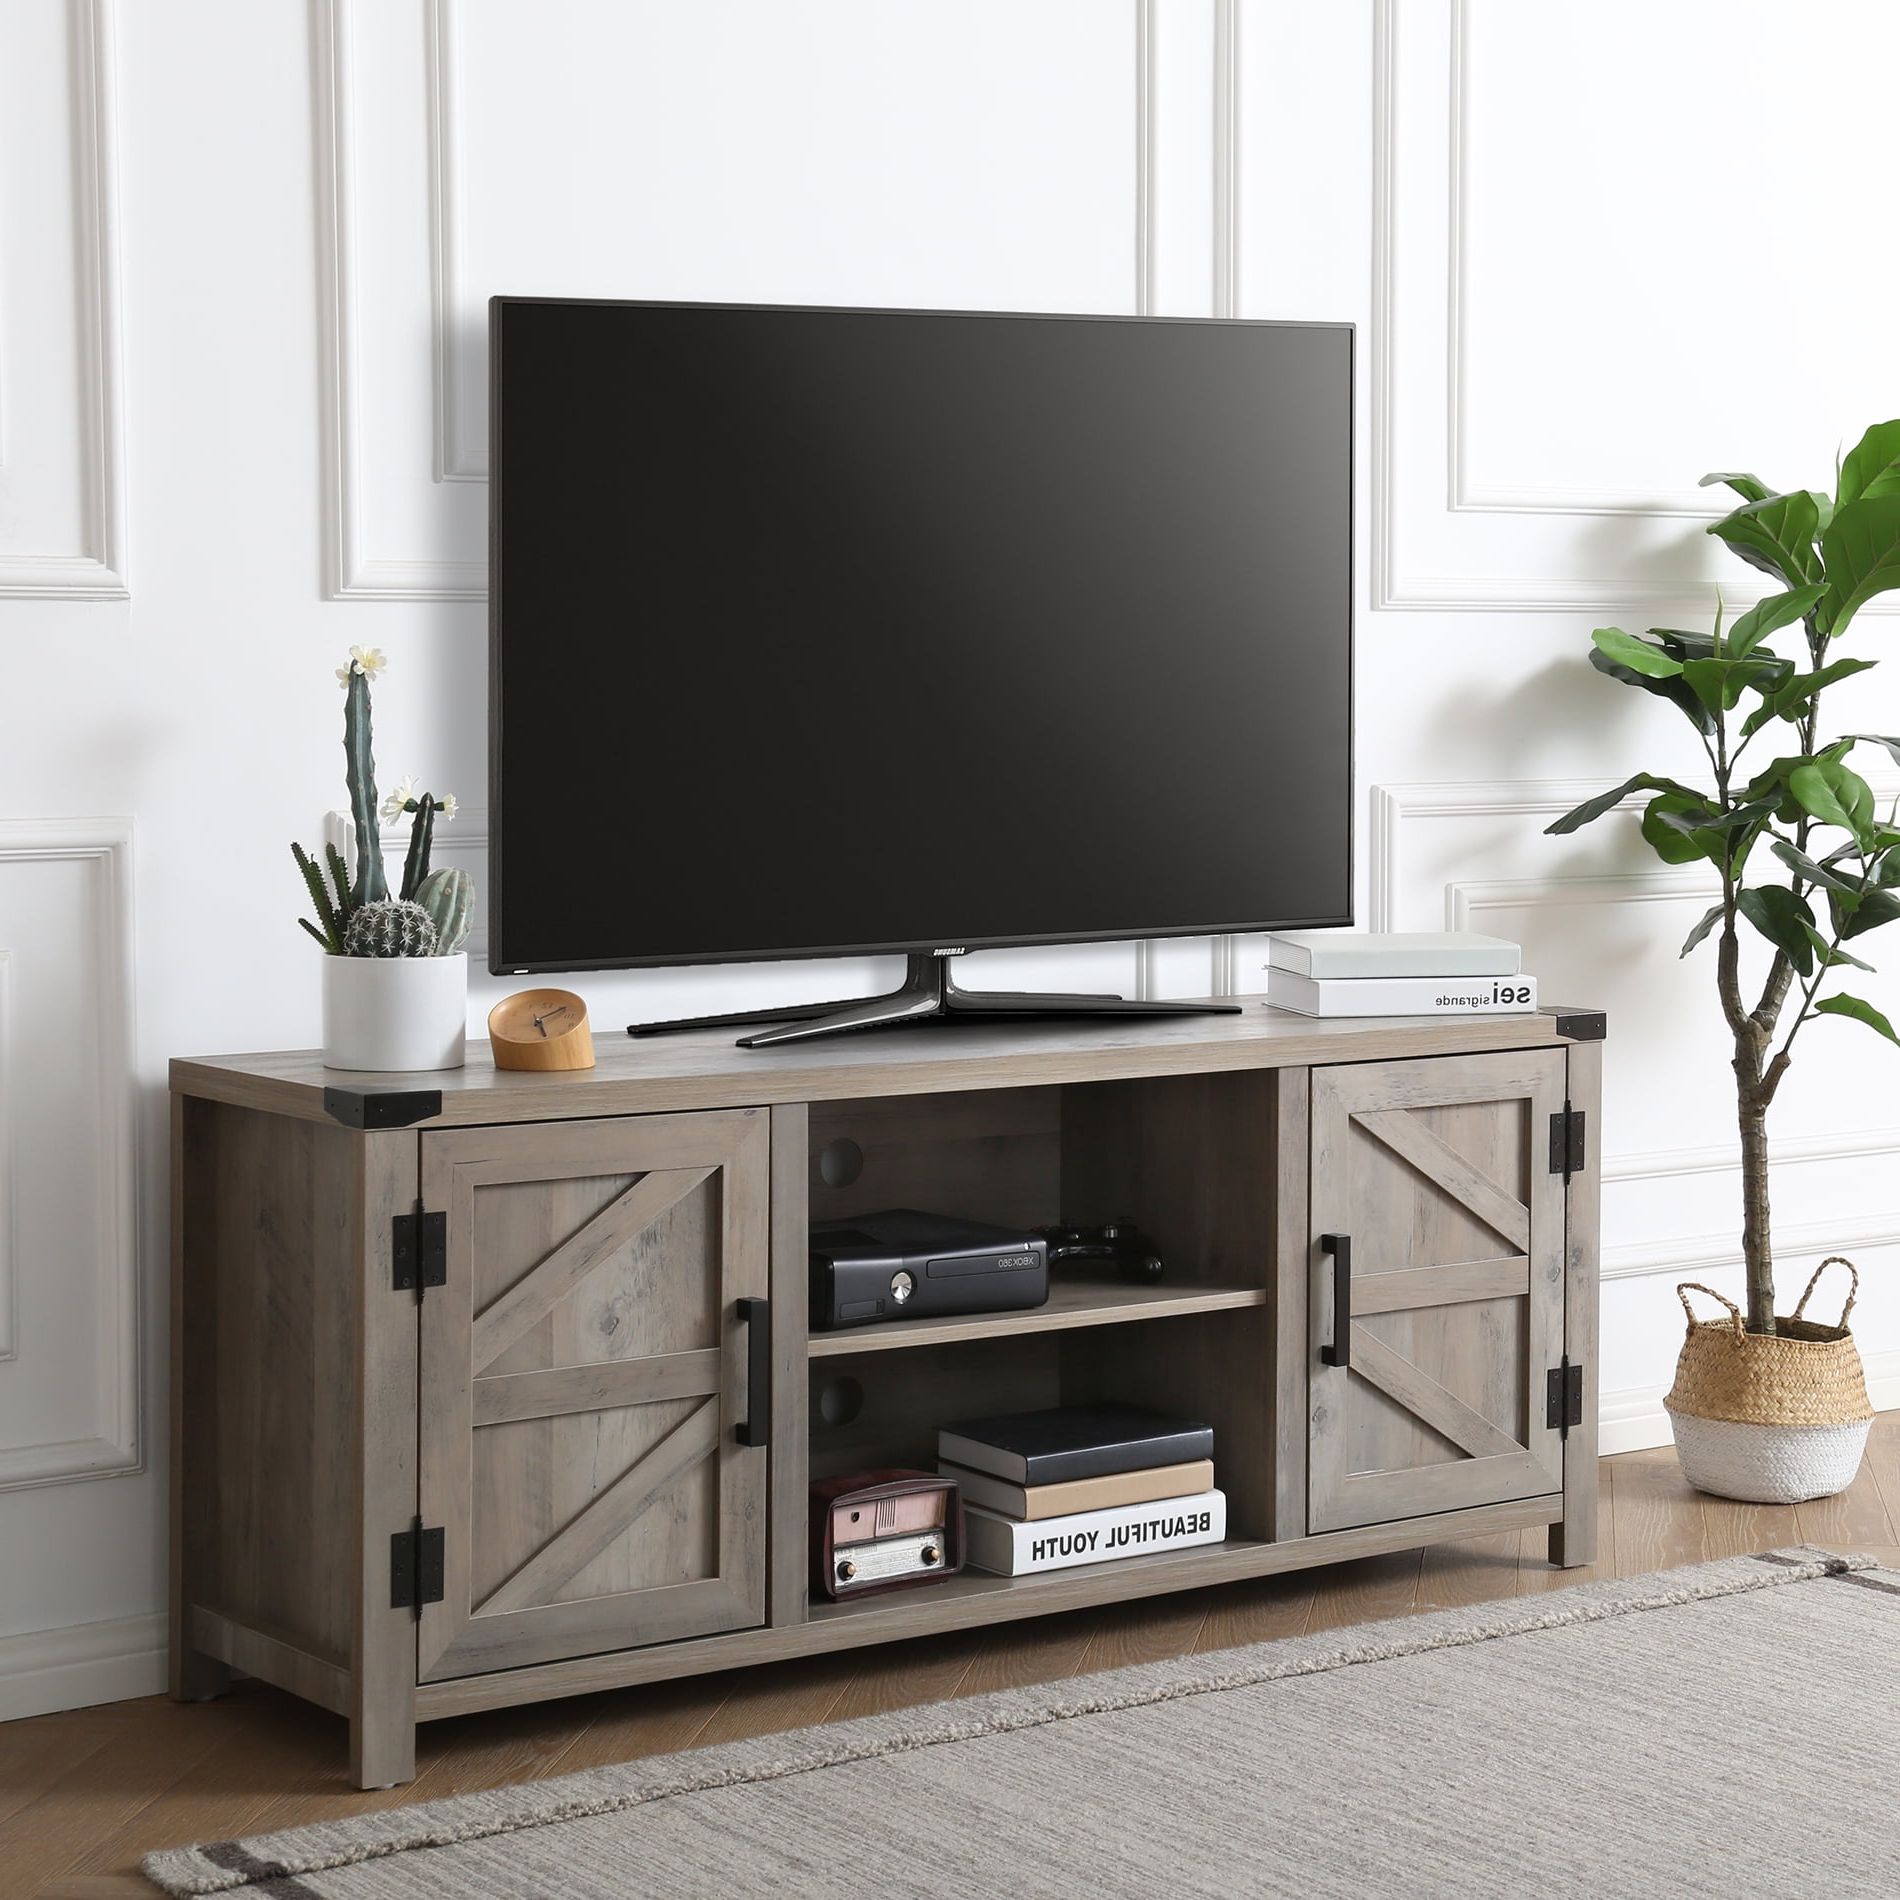 Well Liked Fitueyes Farmhouse Barn Door Wood Tv Stands For 70'' Flat Screen, Tv Pertaining To Farmhouse Tv Stands For 70 Inch Tv (View 3 of 15)